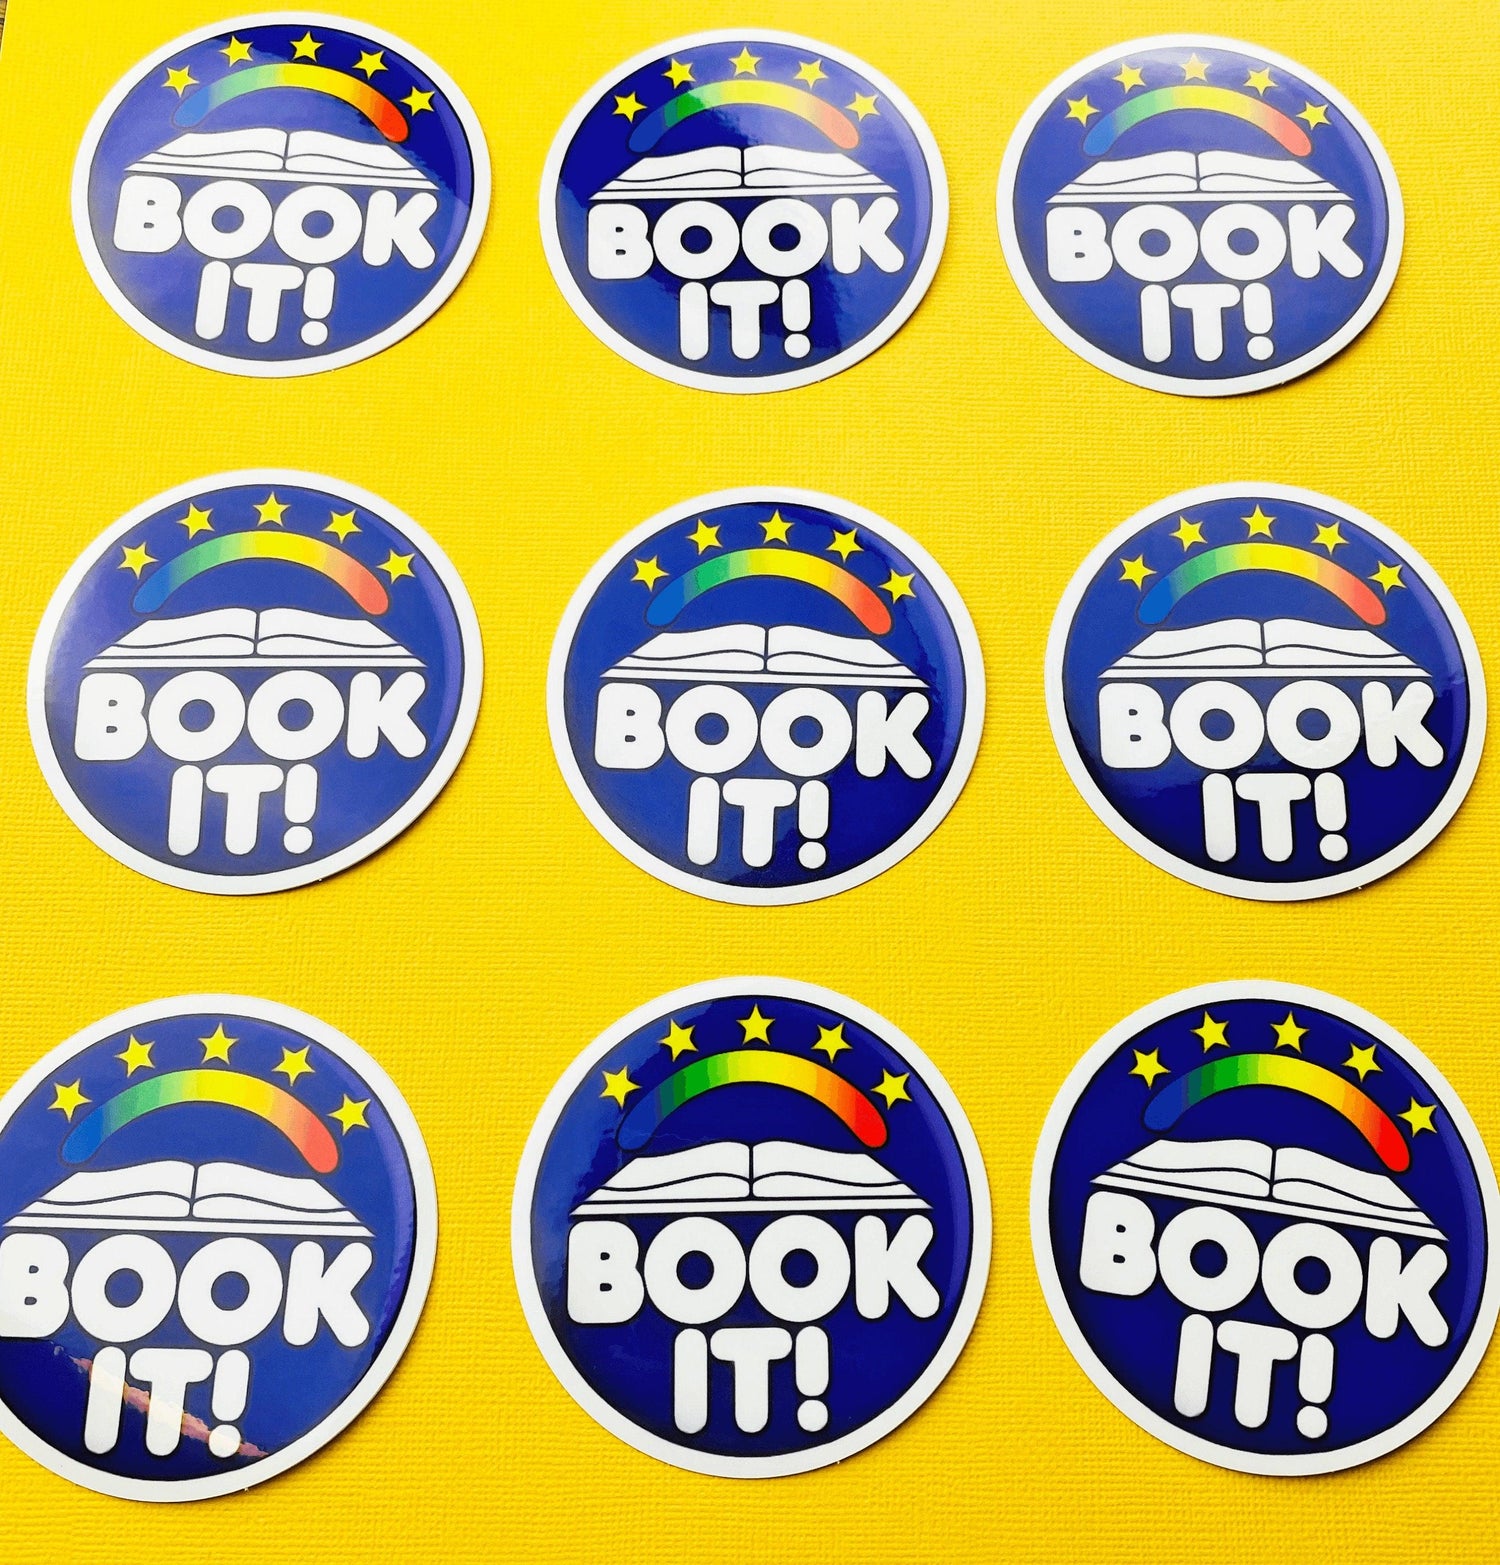 Eighties Kids Sticker Book It! designs from the 1980s Retro Reading Vintage Nostalgia Eighties Nineties Stickers - Ottos Grotto :: Stickers For Your Stuff